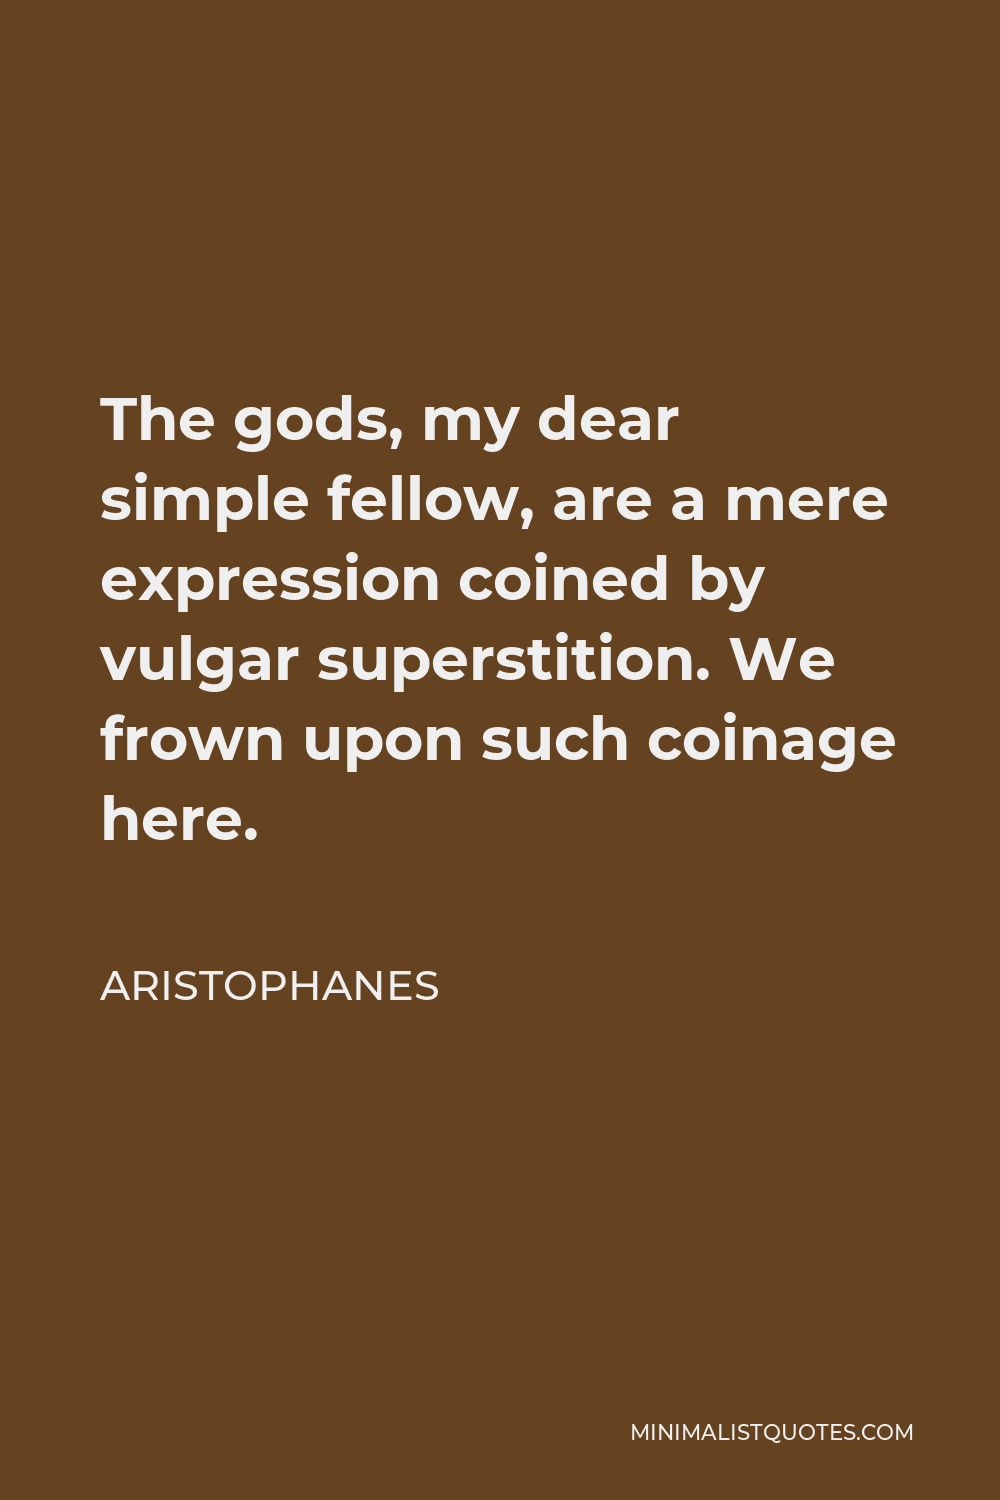 Aristophanes Quote - The gods, my dear simple fellow, are a mere expression coined by vulgar superstition. We frown upon such coinage here.